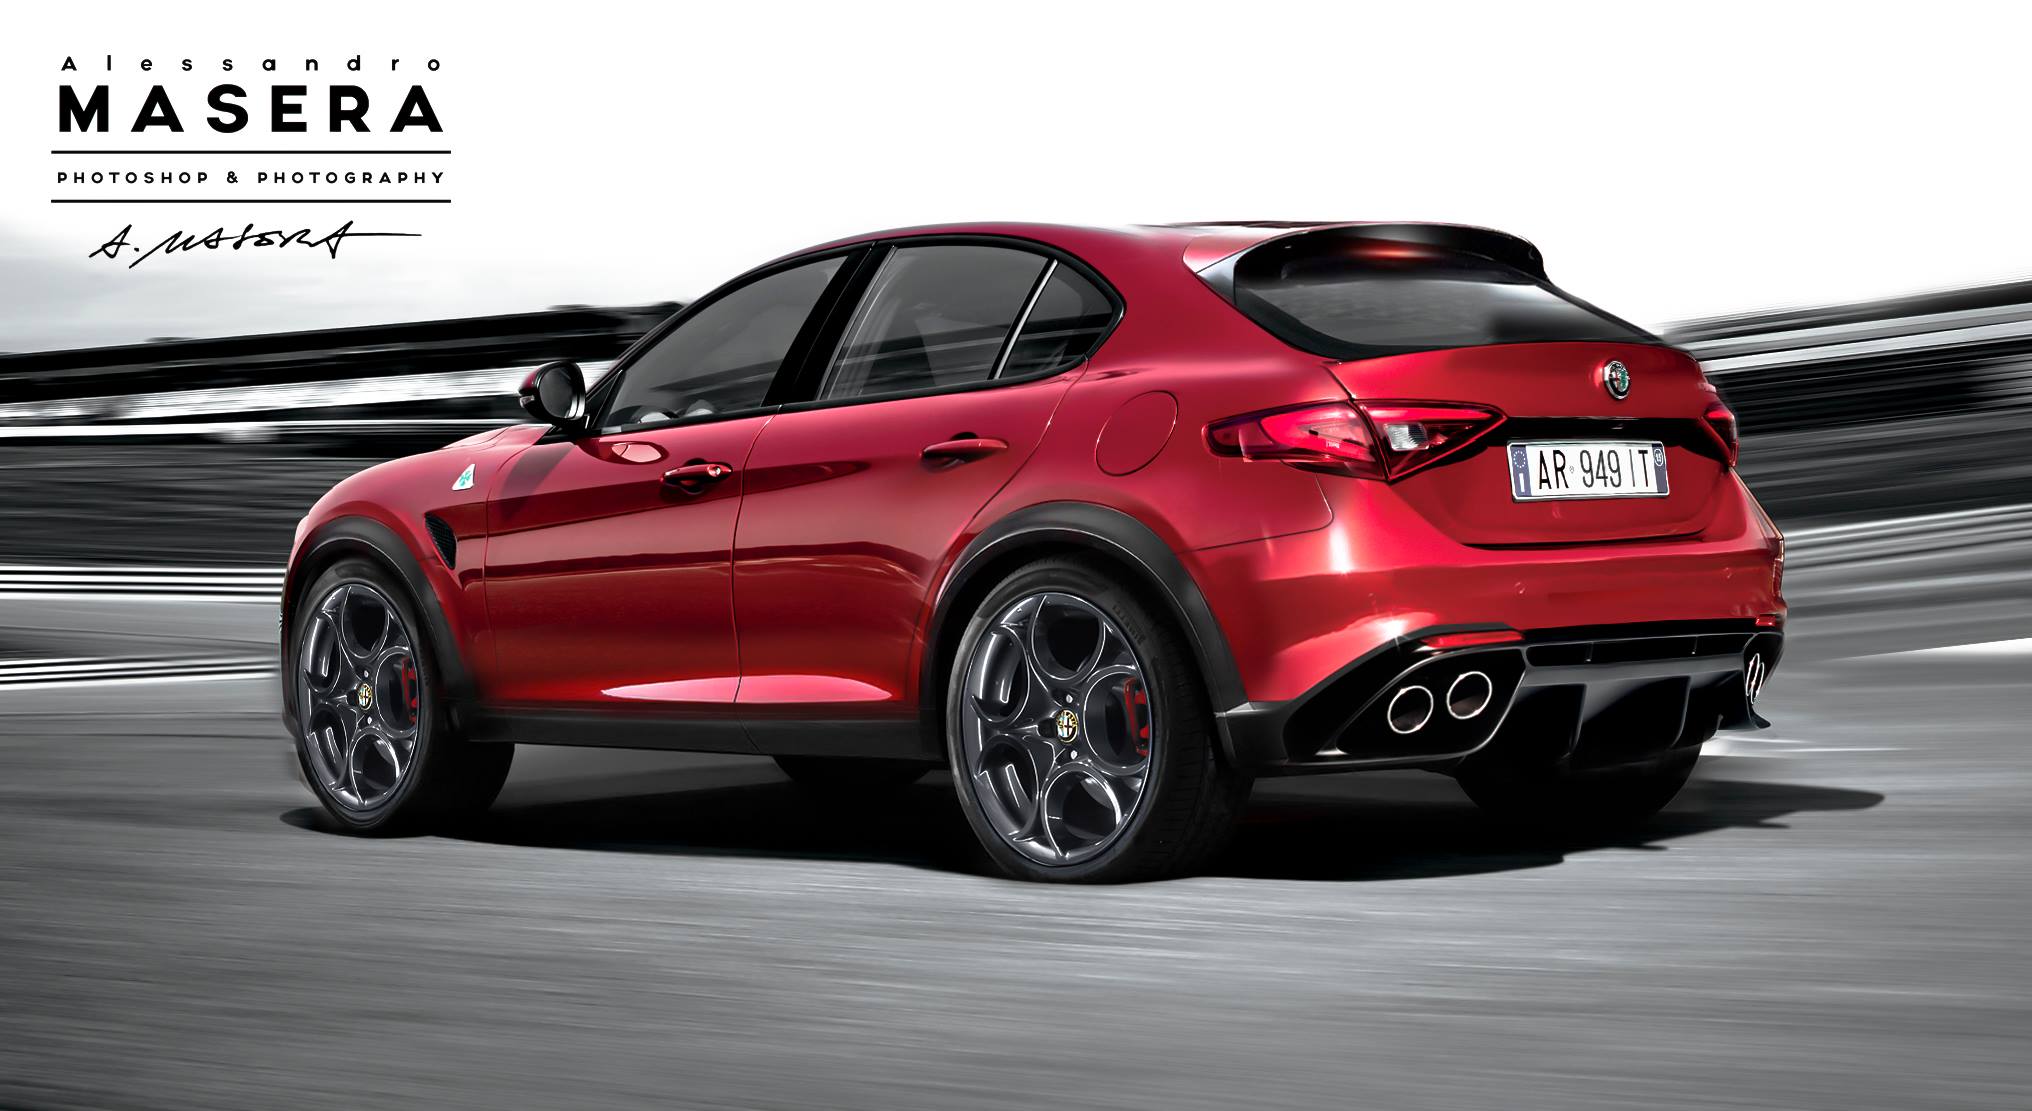 alfa-romeo-d-suv-rendered-with-giulia-styling-we-want-one-now_2-2